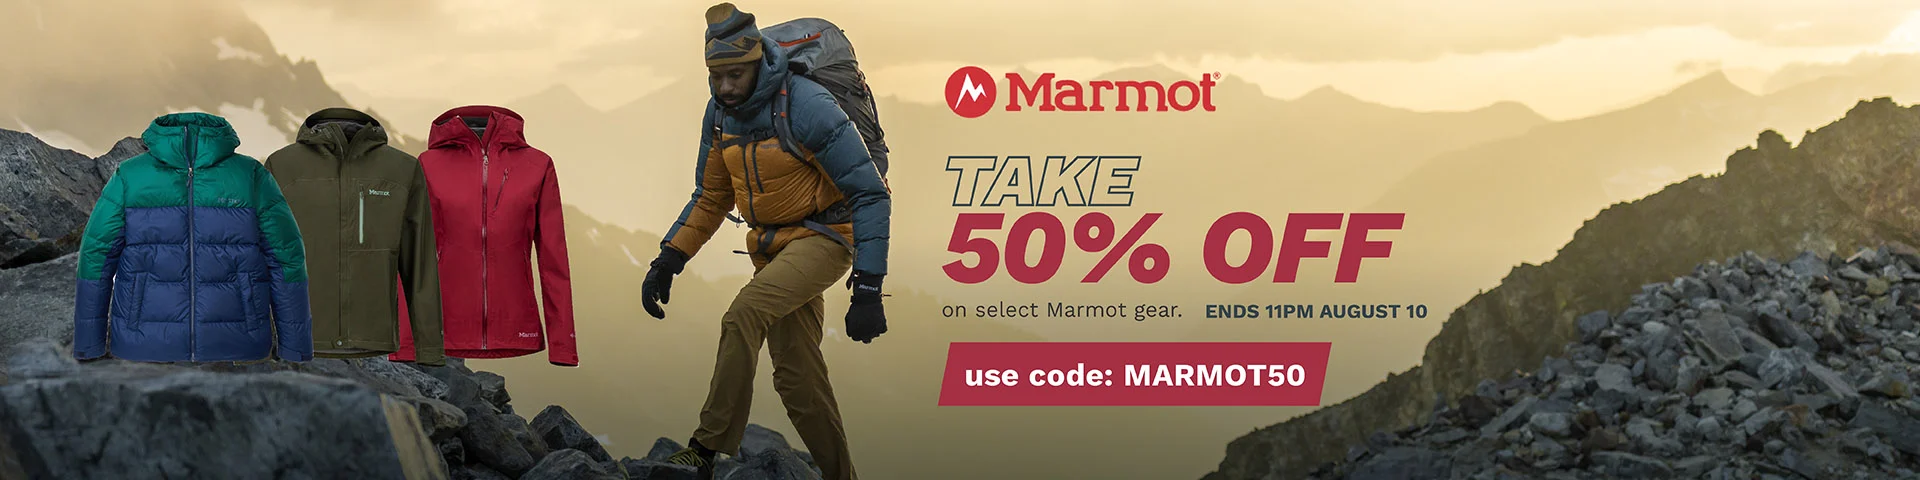 Take 50% OFF on select Marmot gear with promo code at Pushys